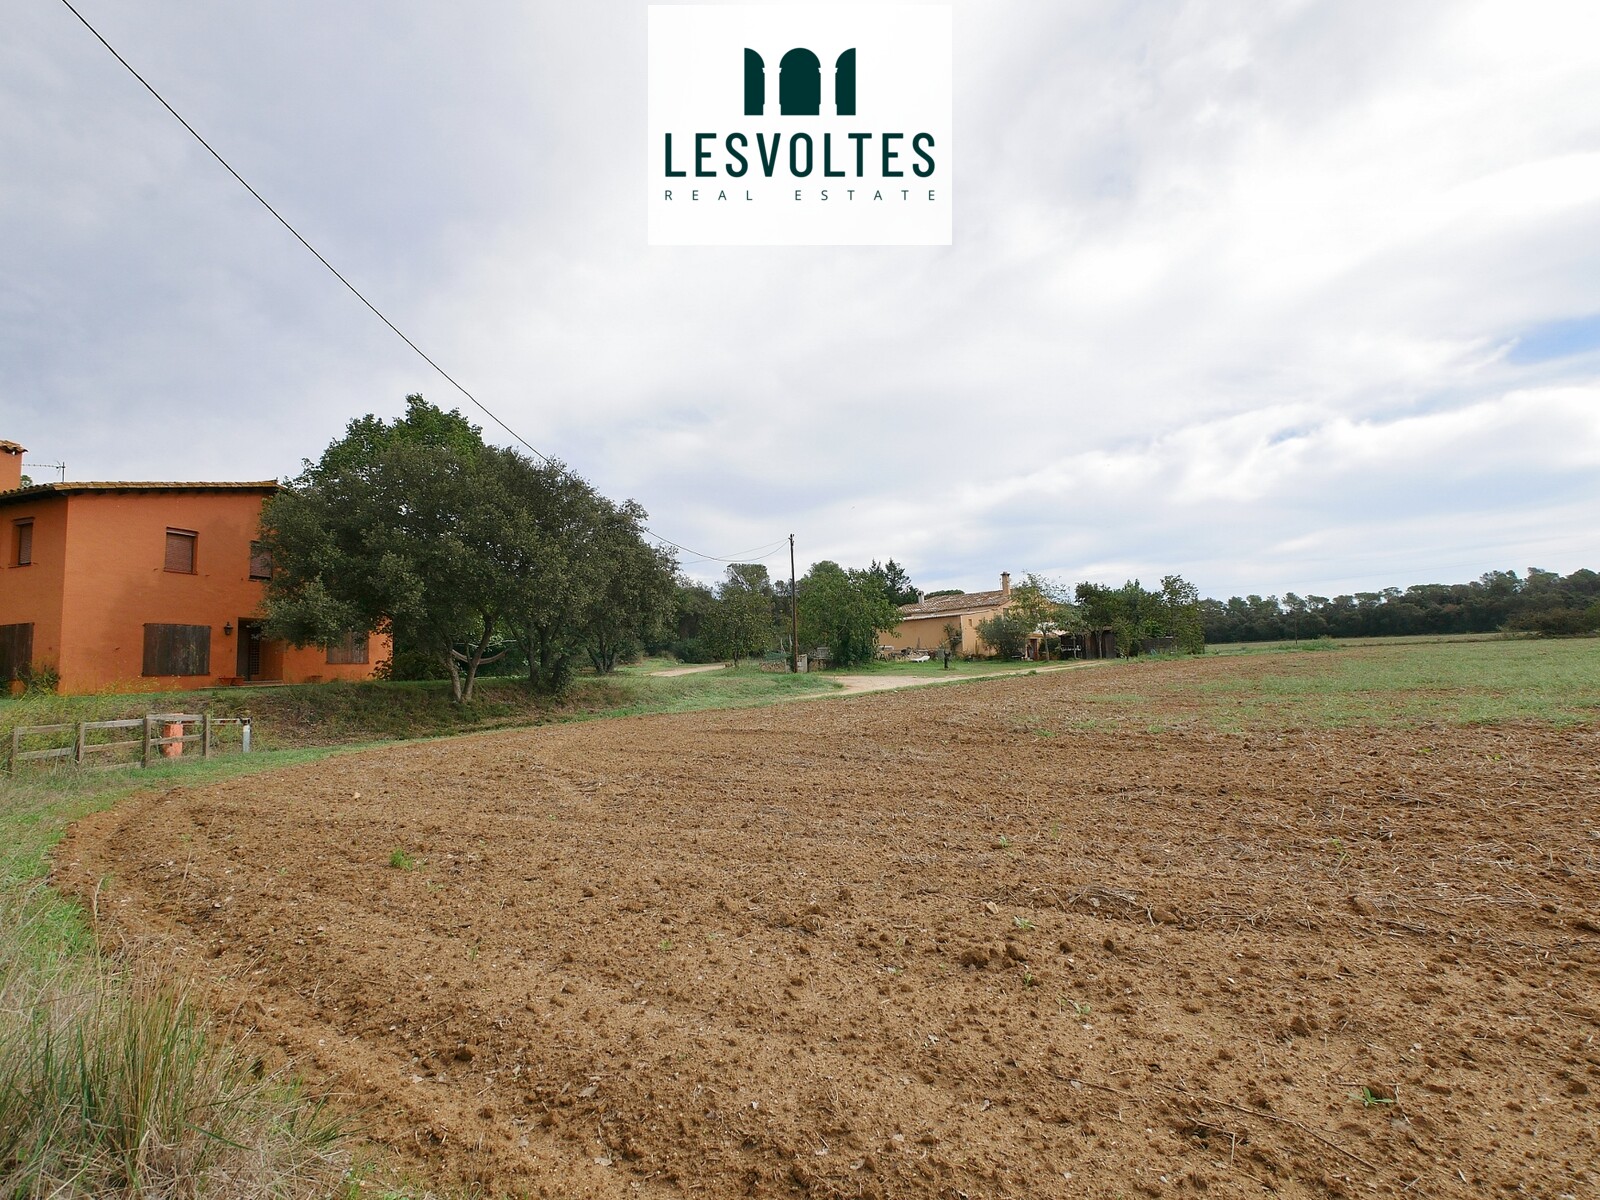 SPLENDID PROPERTY OF 15 HECTARES WITH STONE FARMHOUSE AND HOUSE FROM THE YEAR 1980, FOR SALE IN FORALLAC, BAIX EMPORDÀ.